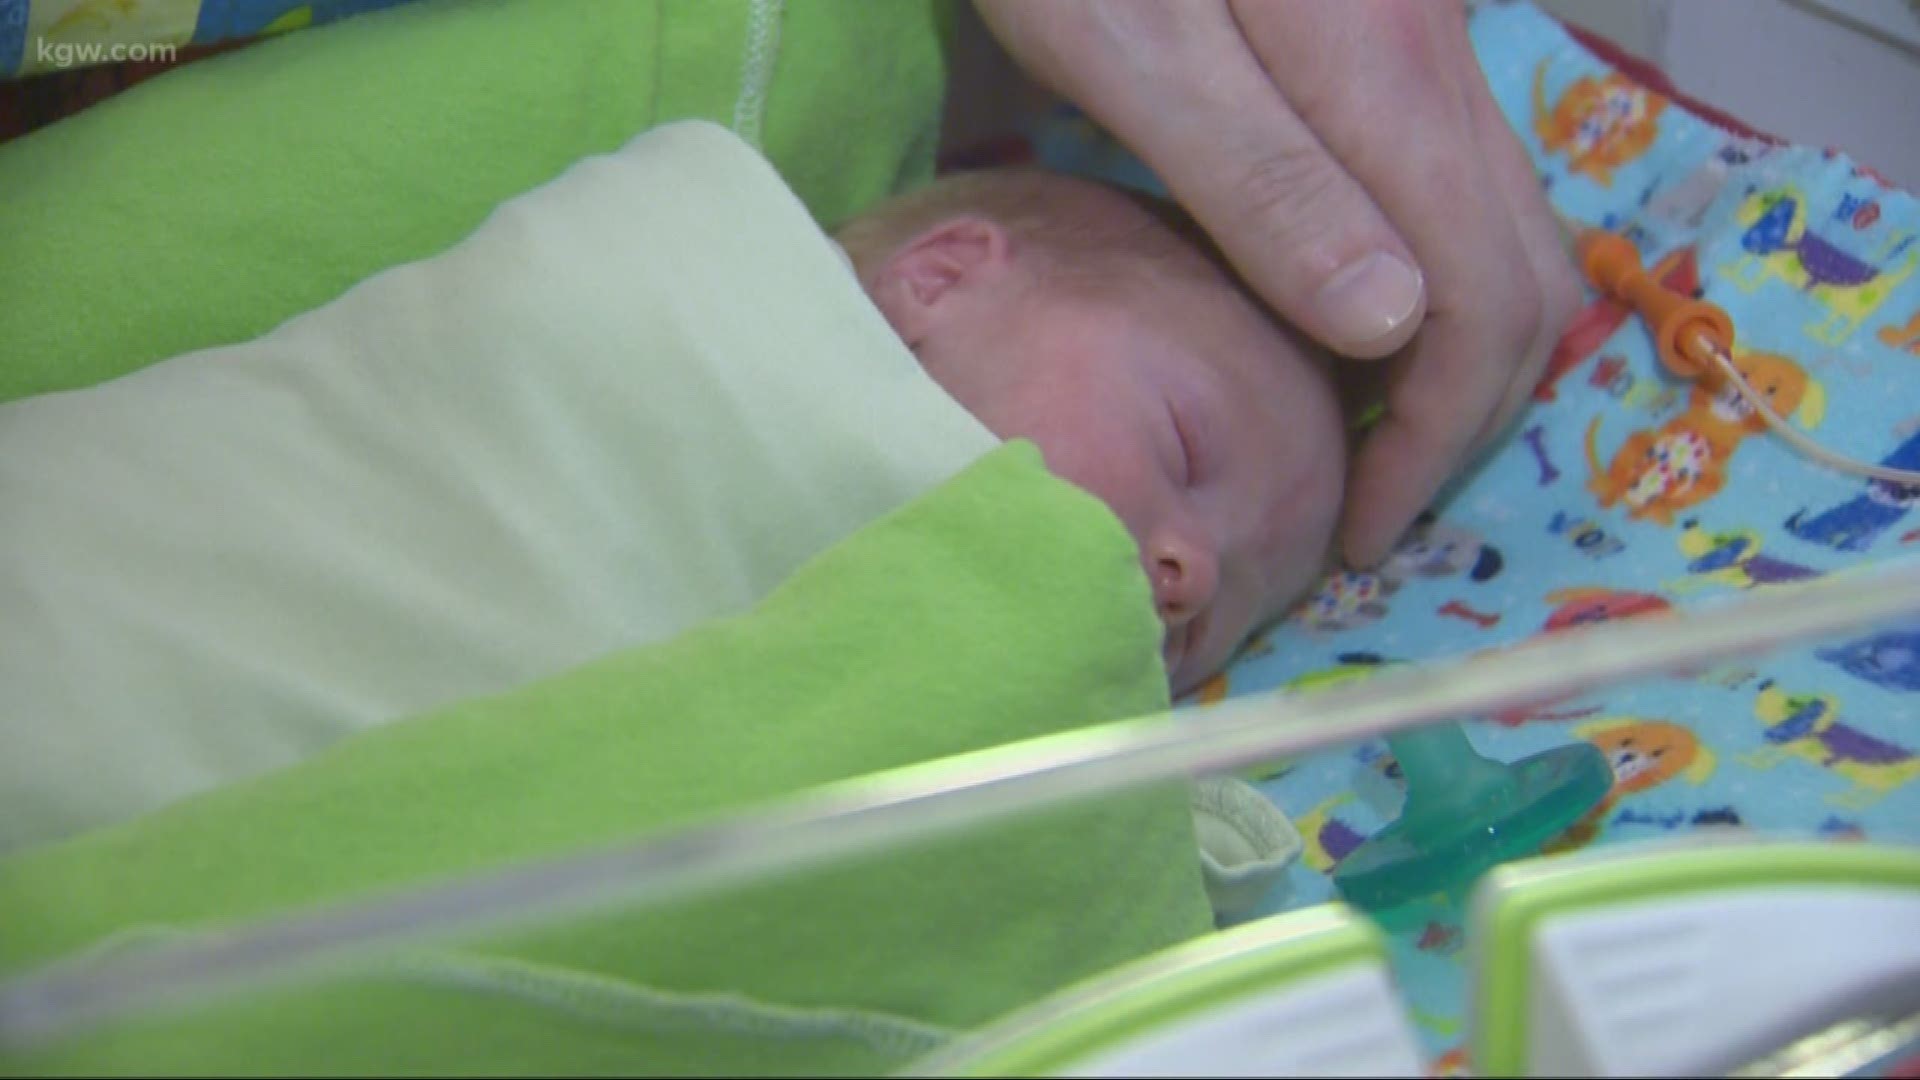 Therapy through music. Ashley Korslien explains how it’s helping NICU babies.